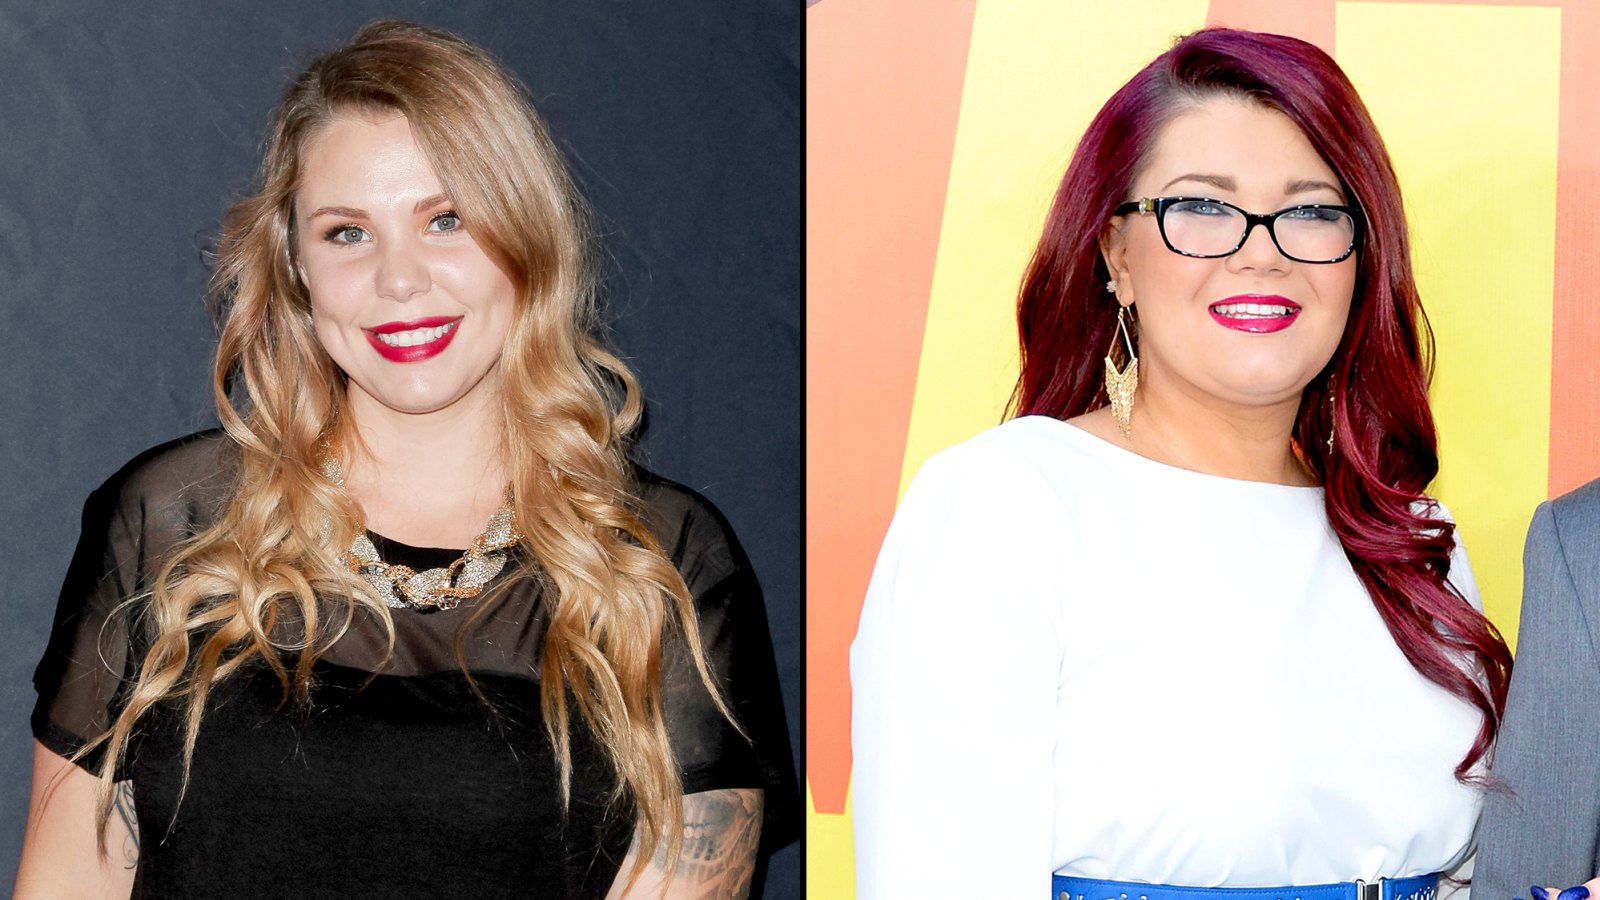 Kailyn Lowry and Amber Portwood